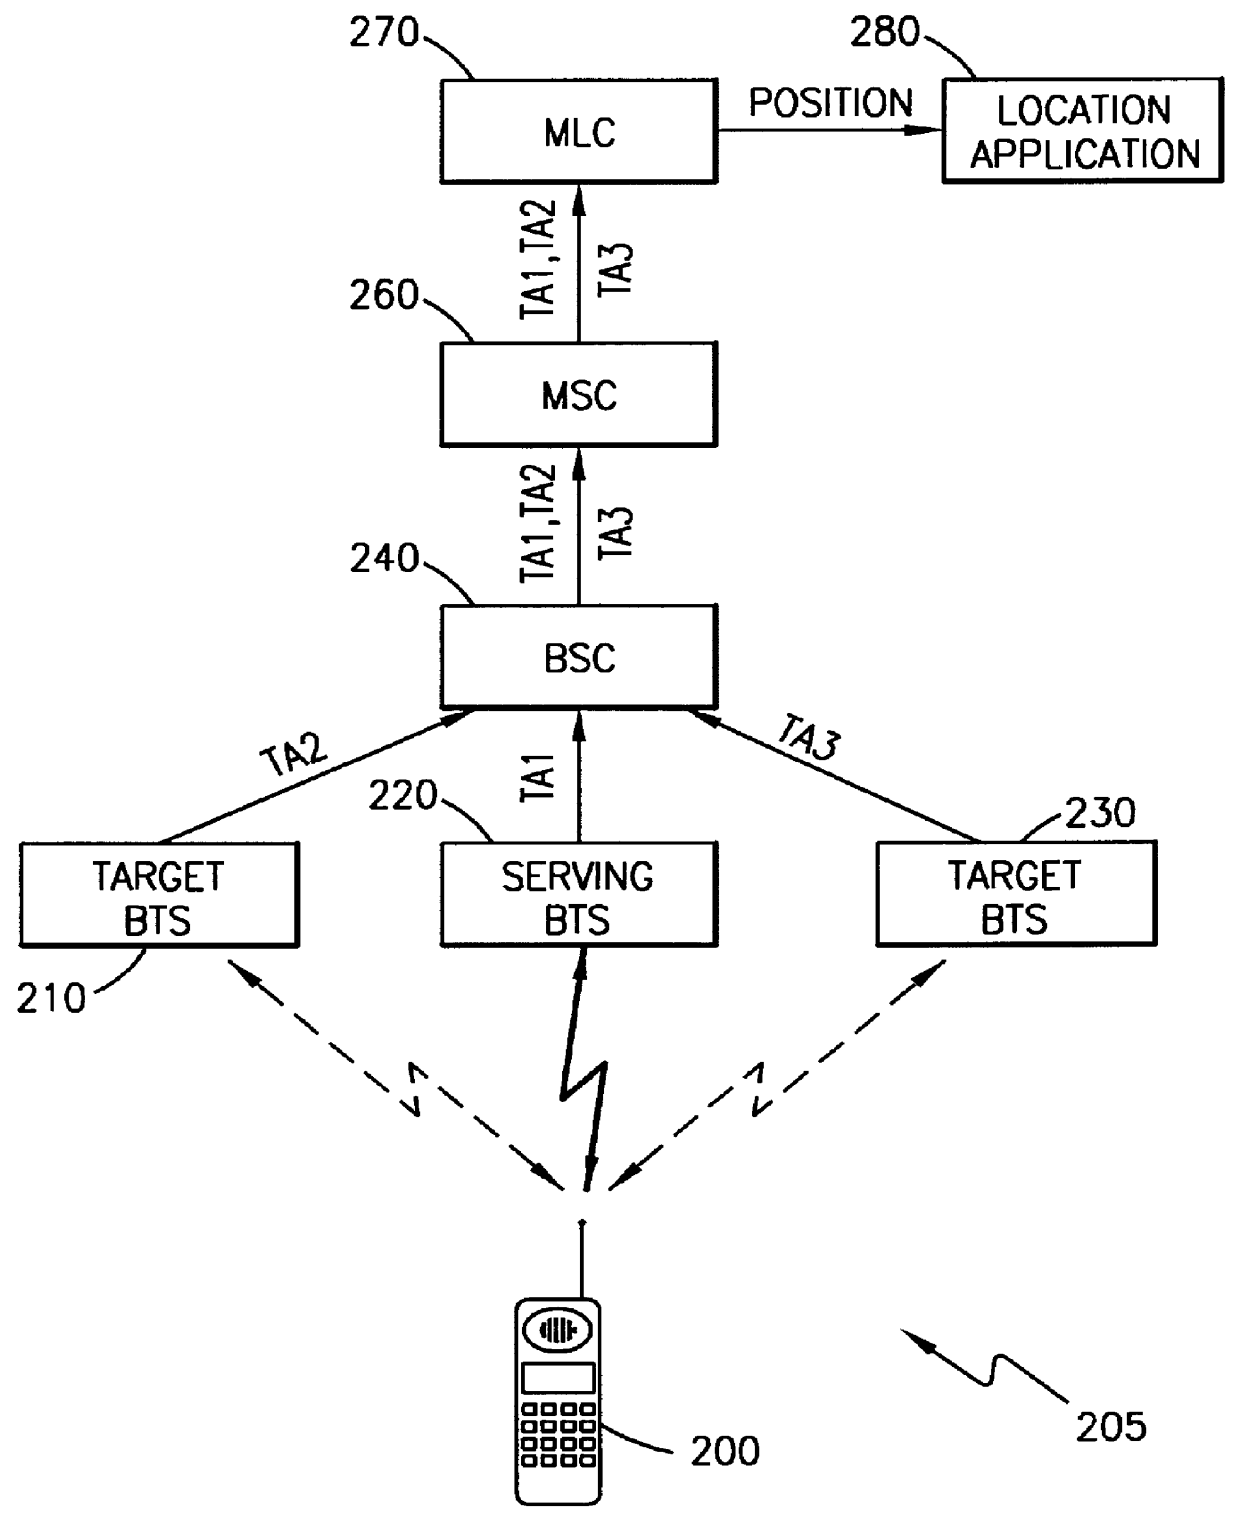 System and method for defining location services